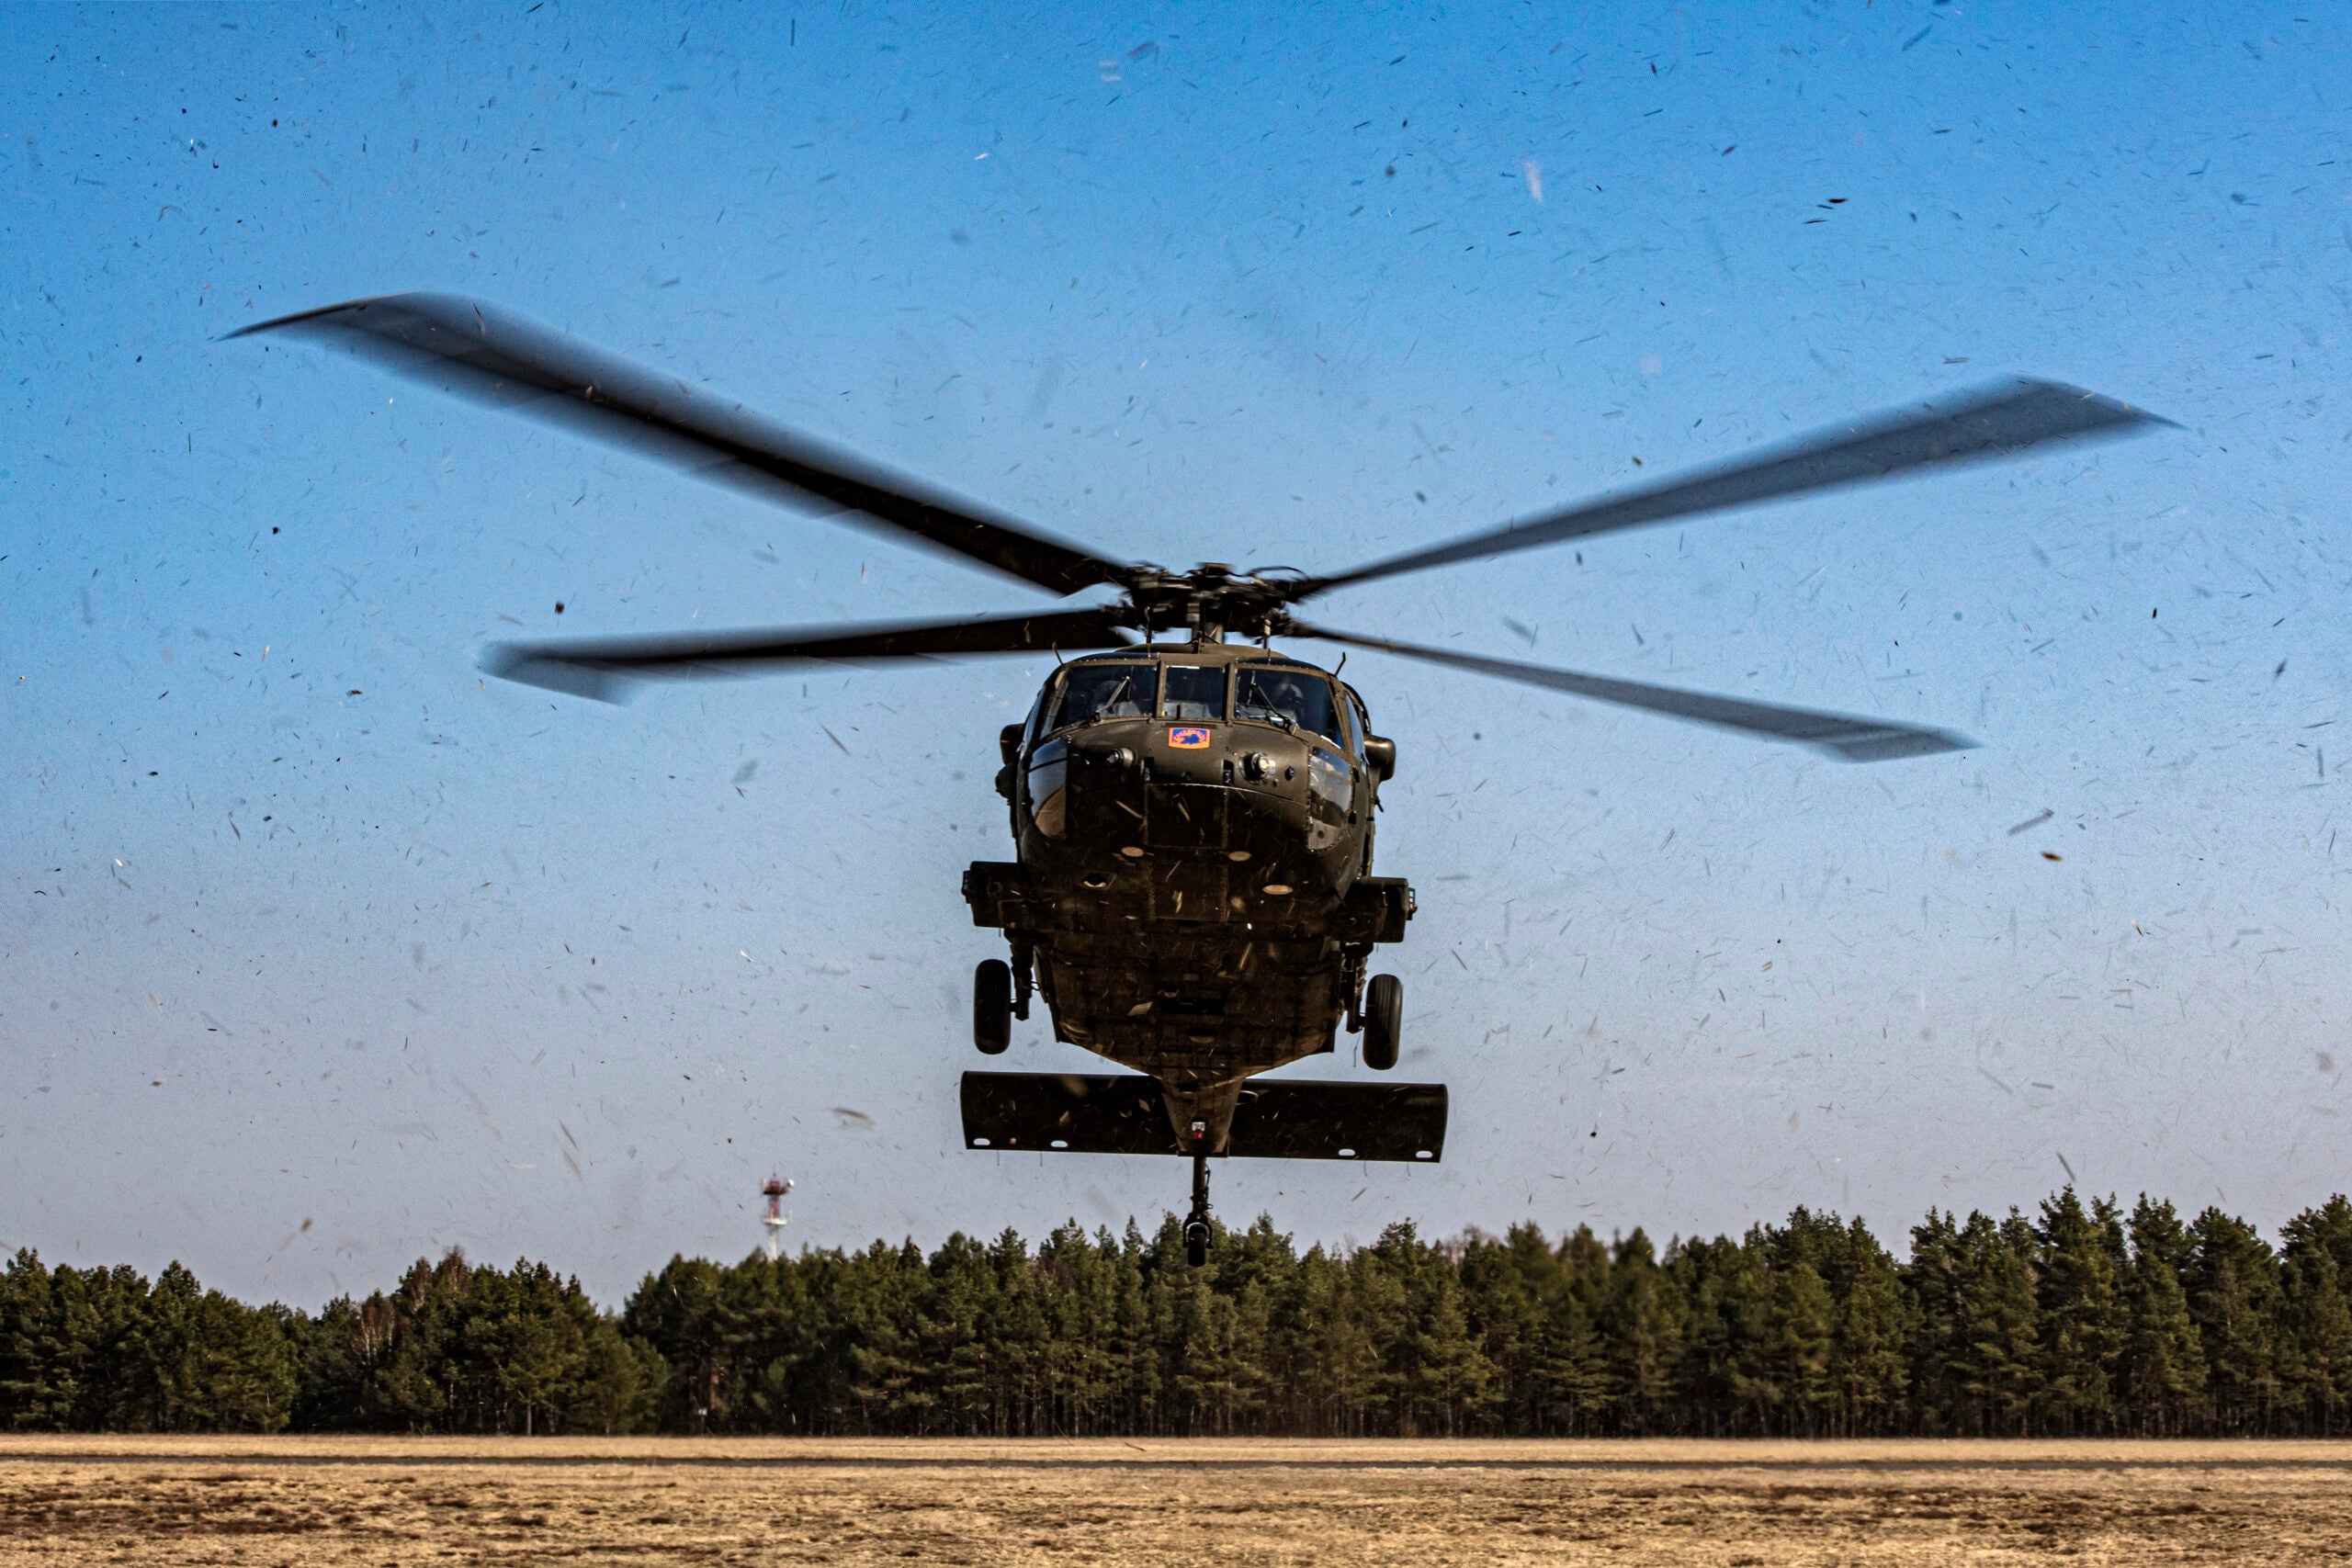 A UH-60 Blackhawk helicopter, from the U.S. Army 1-214th General Support Aviation Battalion, 12th Combat Aviation Brigade conduct individual and collective aerial gunnery qualification as part of a week-long training exercise at the Nadarzyce Training Area, Poland, March 25, 2022. The training allows air crews to enhance their proficiency with the M240H machine gun weapon system and improve their readiness to support casualty evacuation operations. The 12th CAB is among other units assigned to V Corps, America’s Forward Deployed Corps in Europe that works alongside NATO Allies and regional security partners to provide combat-ready forces, executes joint and multinational training exercises, and retains command and control for all rotational and assigned units in the European theater. (U.S. Army photo by Michele Wiencek).